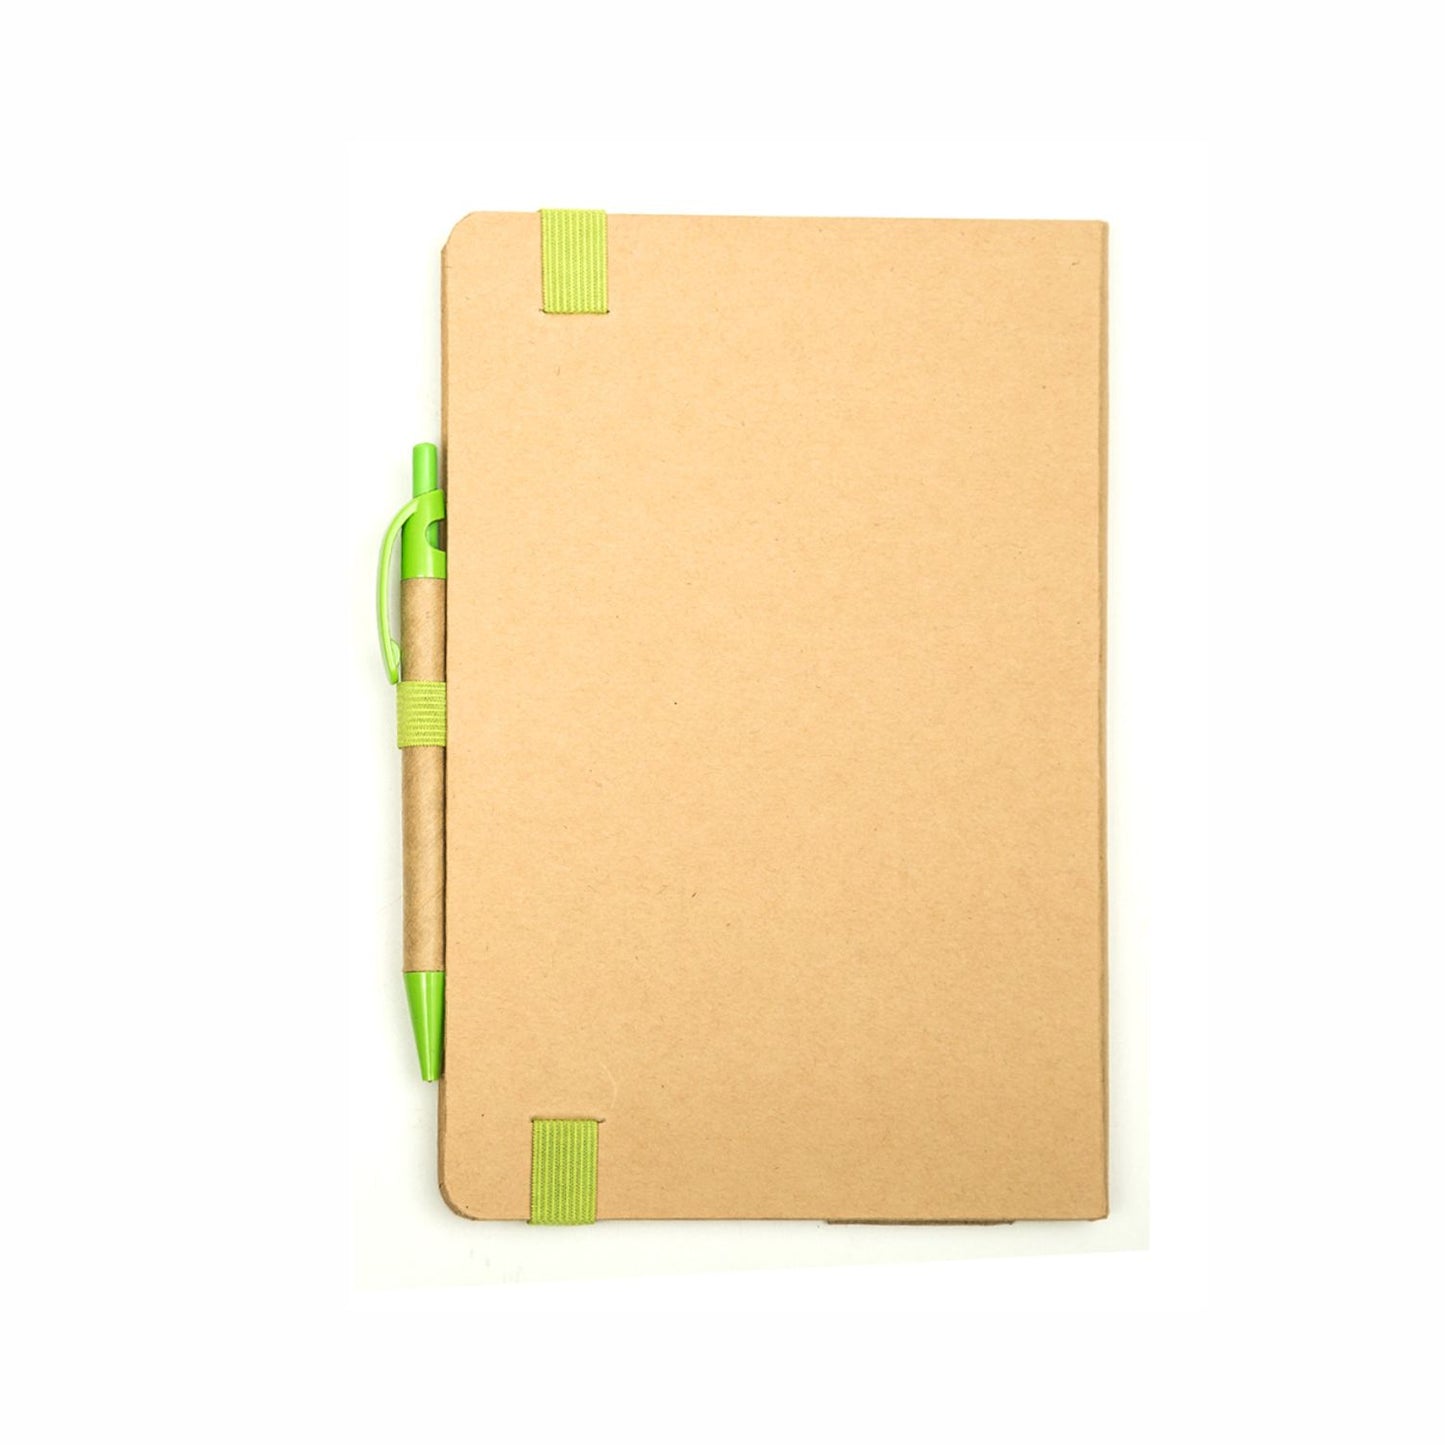 Eco A5 Journal Notebook